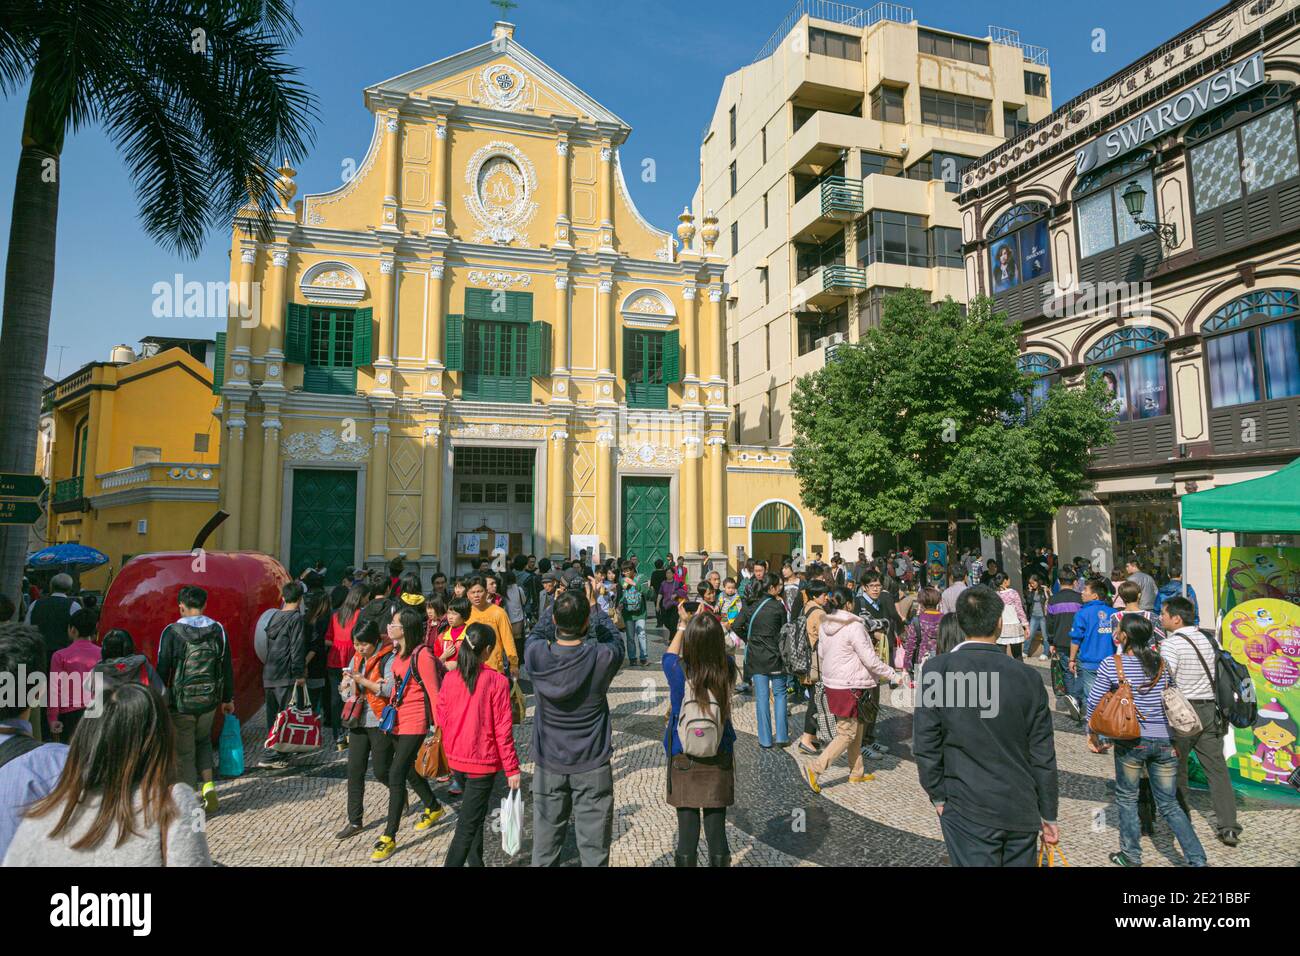 Macau, China.  St Dominic's Church, part of the Historic Centre of Macau which is a UNESCO World Heritage Site. Stock Photo